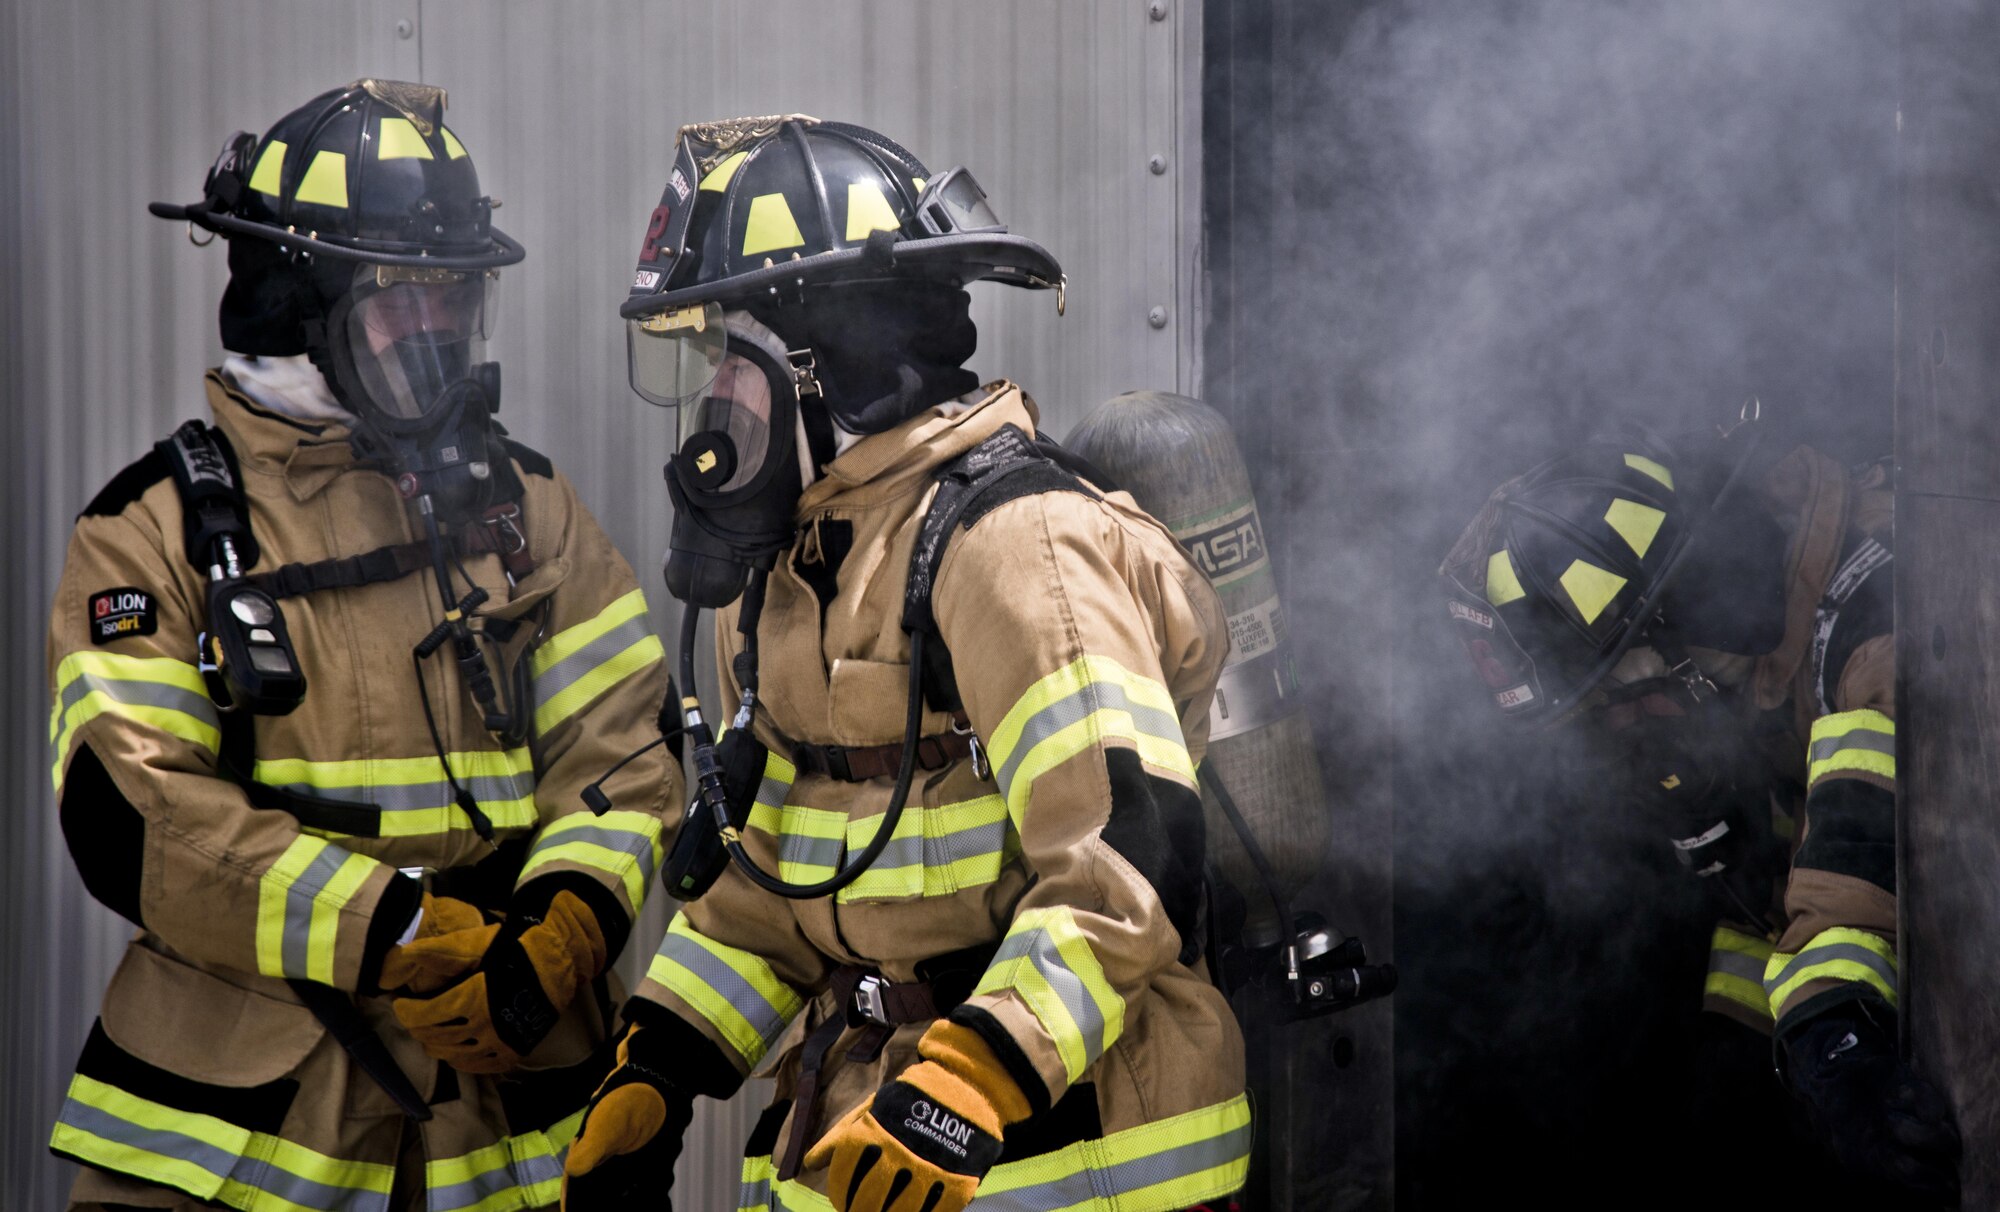 U.S. Air Force firefighters assigned to the 6th Civil Engineer Squadron exit a training building during a structural, live-burn exercise at MacDill Air Force Base, Fla., July 24, 2017. Airmen were trained on the behavior of a live fire inside a building and how to safely extinguish it. (U.S. Air Force photo by Airman 1st Class Adam R. Shanks)